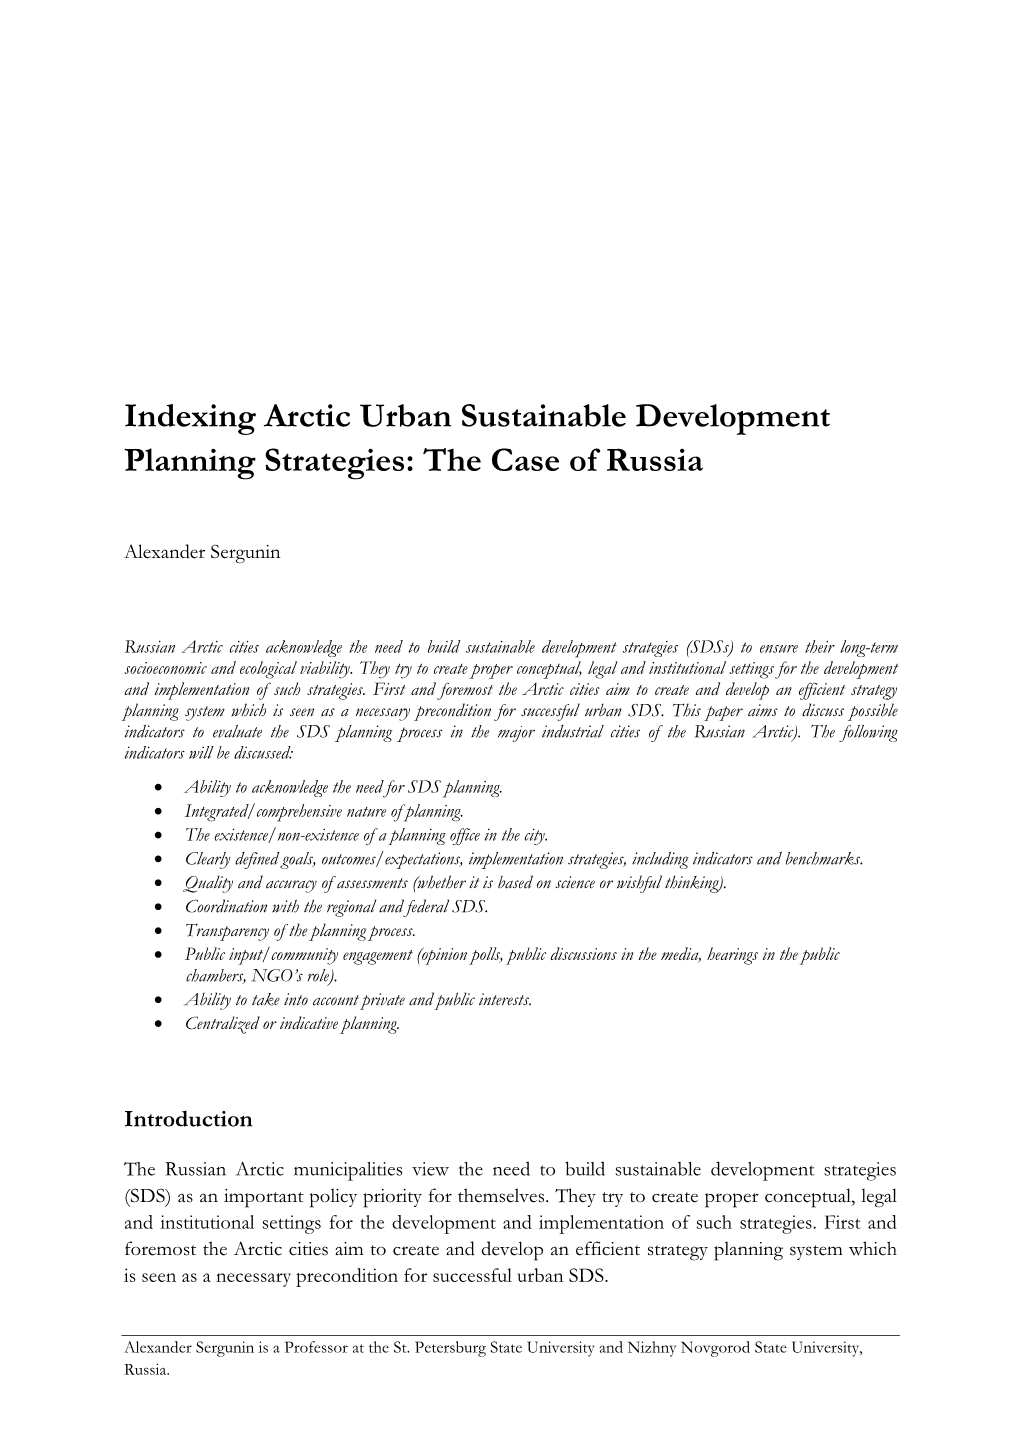 Indexing Arctic Urban Sustainable Development Planning Strategies: the Case of Russia